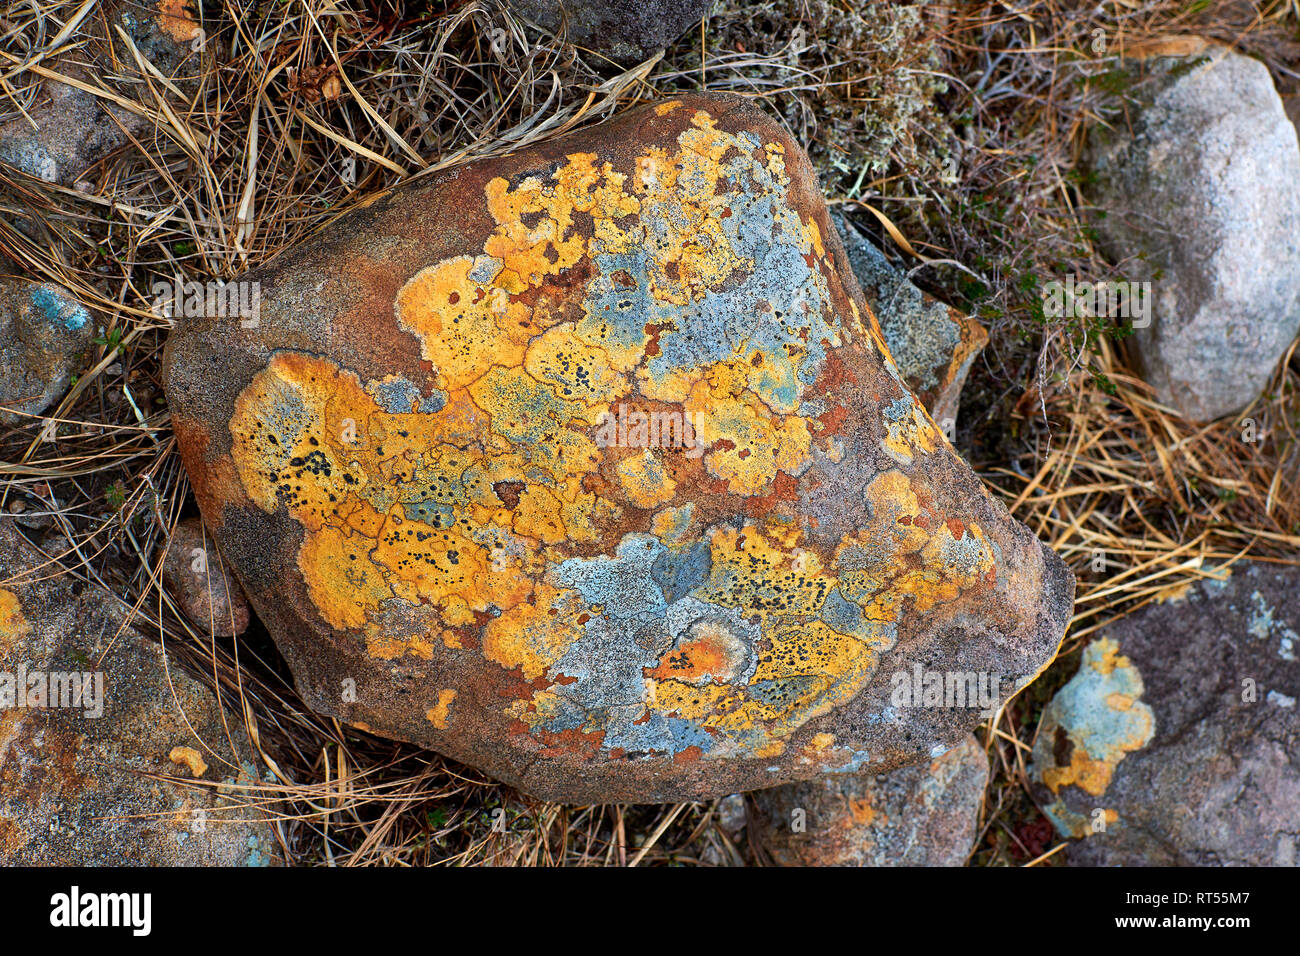 LICHENS ORANGE YELLOW AND BLUE GROWING ON A STONE WEST COAST OF SCOTLAND Stock Photo